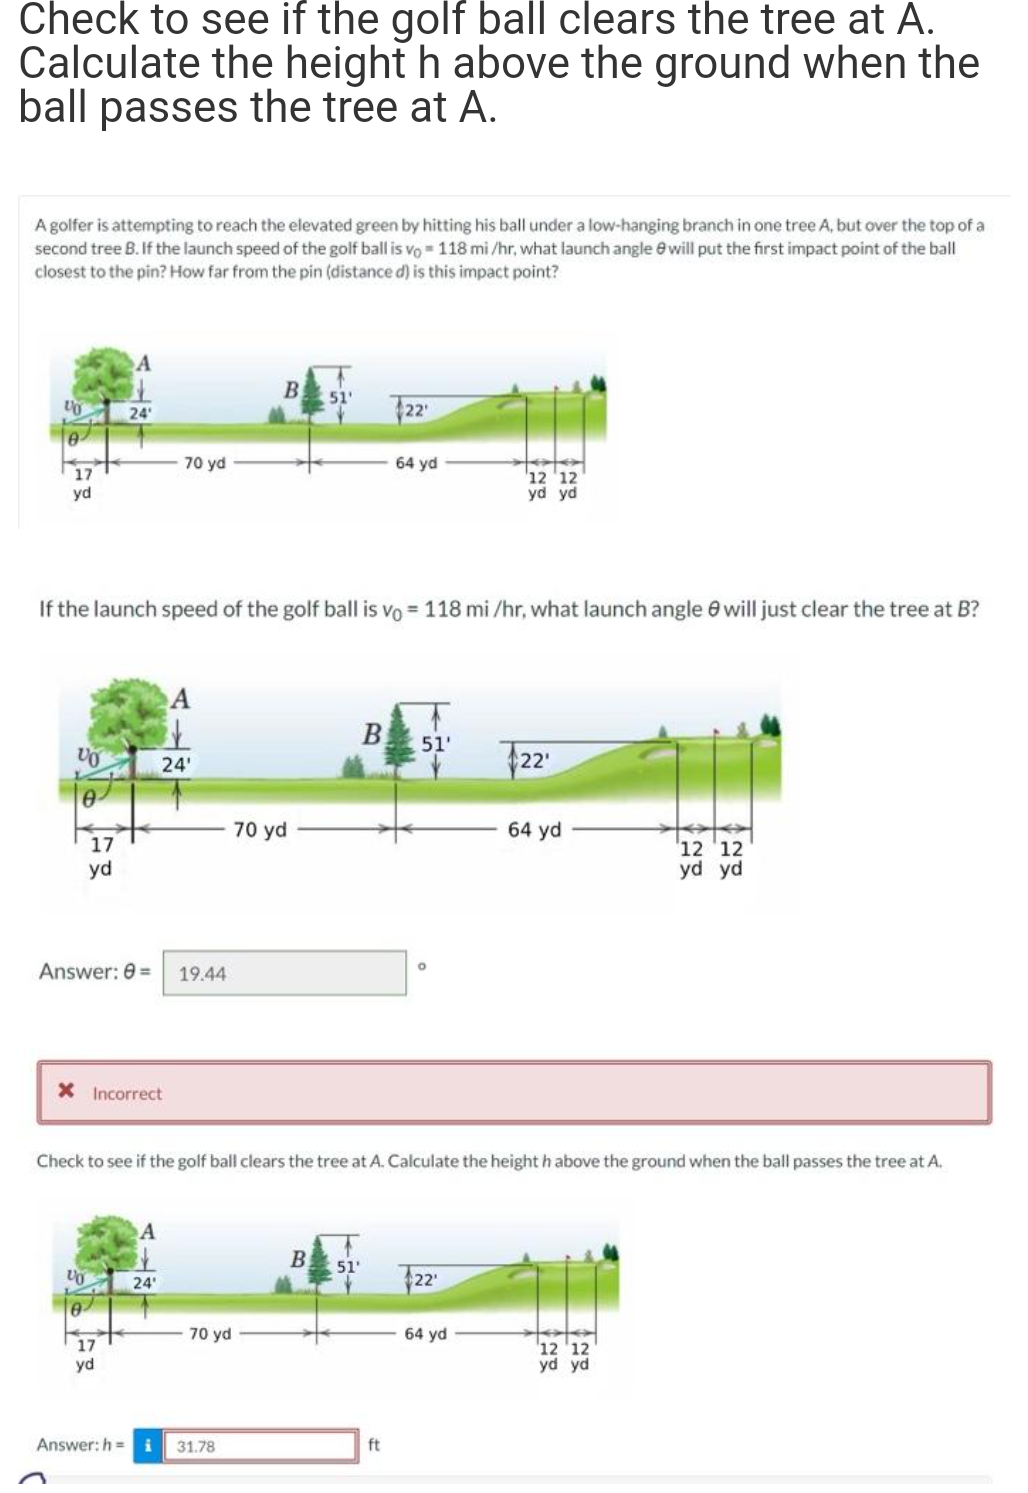 Check to see if the golf ball clears the tree at A.
Calculate the height h above the ground when the
ball passes the tree at A.
A golfer is attempting to reach the elevated green by hitting his ball under a low-hanging branch in one tree A, but over the top of a
second tree B. If the launch speed of the golf ball is vo 118 mi/hr, what launch angle will put the first impact point of the ball
closest to the pin? How far from the pin (distance d) is this impact point?
VO
17
yd
VO
0
17
yd
24
VO
0
If the launch speed of the golf ball is vo= 118 mi/hr, what launch angle will just clear the tree at B?
X Incorrect
70 yd
Answer: 0 = 19.44
17
yd
A
it
24'
24'
B
70 yd
Answer: h= i 31.78
70 yd
51'
B
22'
64 yd
B 51'
Check to see if the golf ball clears the tree at A. Calculate the height h above the ground when the ball passes the tree at A.
51'
ft
O
12 12
yd yd
22¹
64 yd
22
64 yd
12 12
yd yd
tata
12 12
yd yd